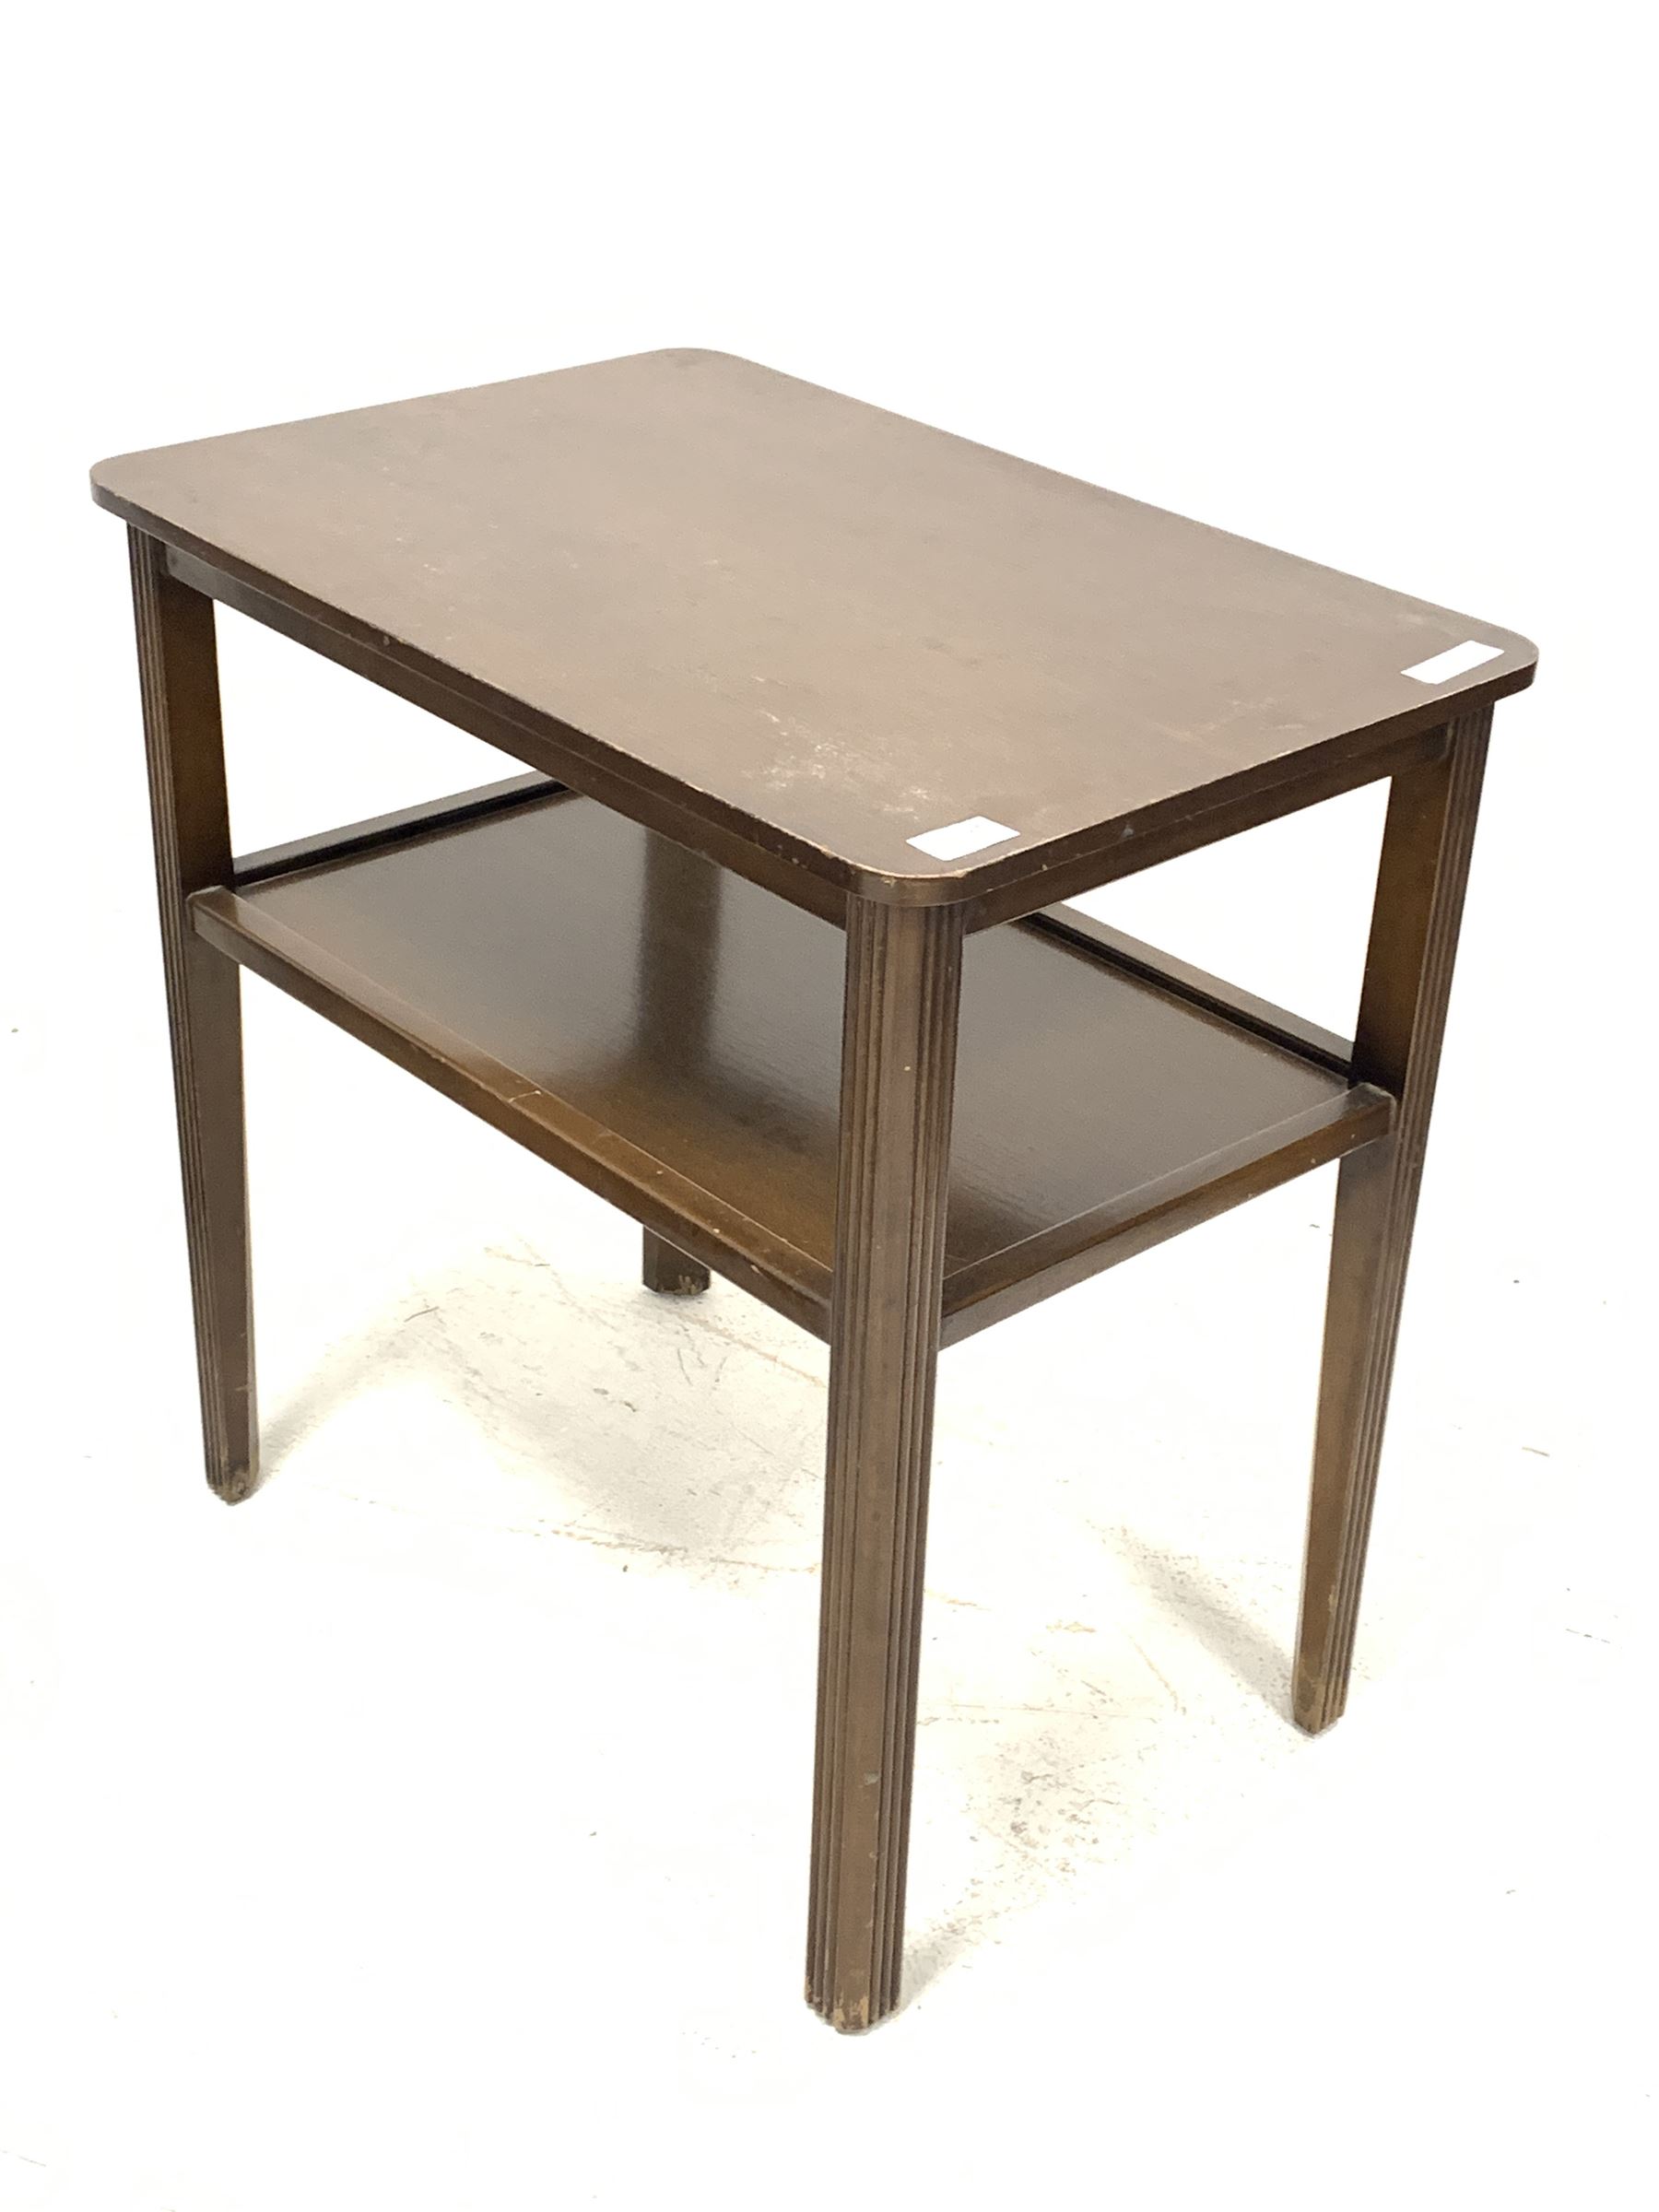 20th century occasional table